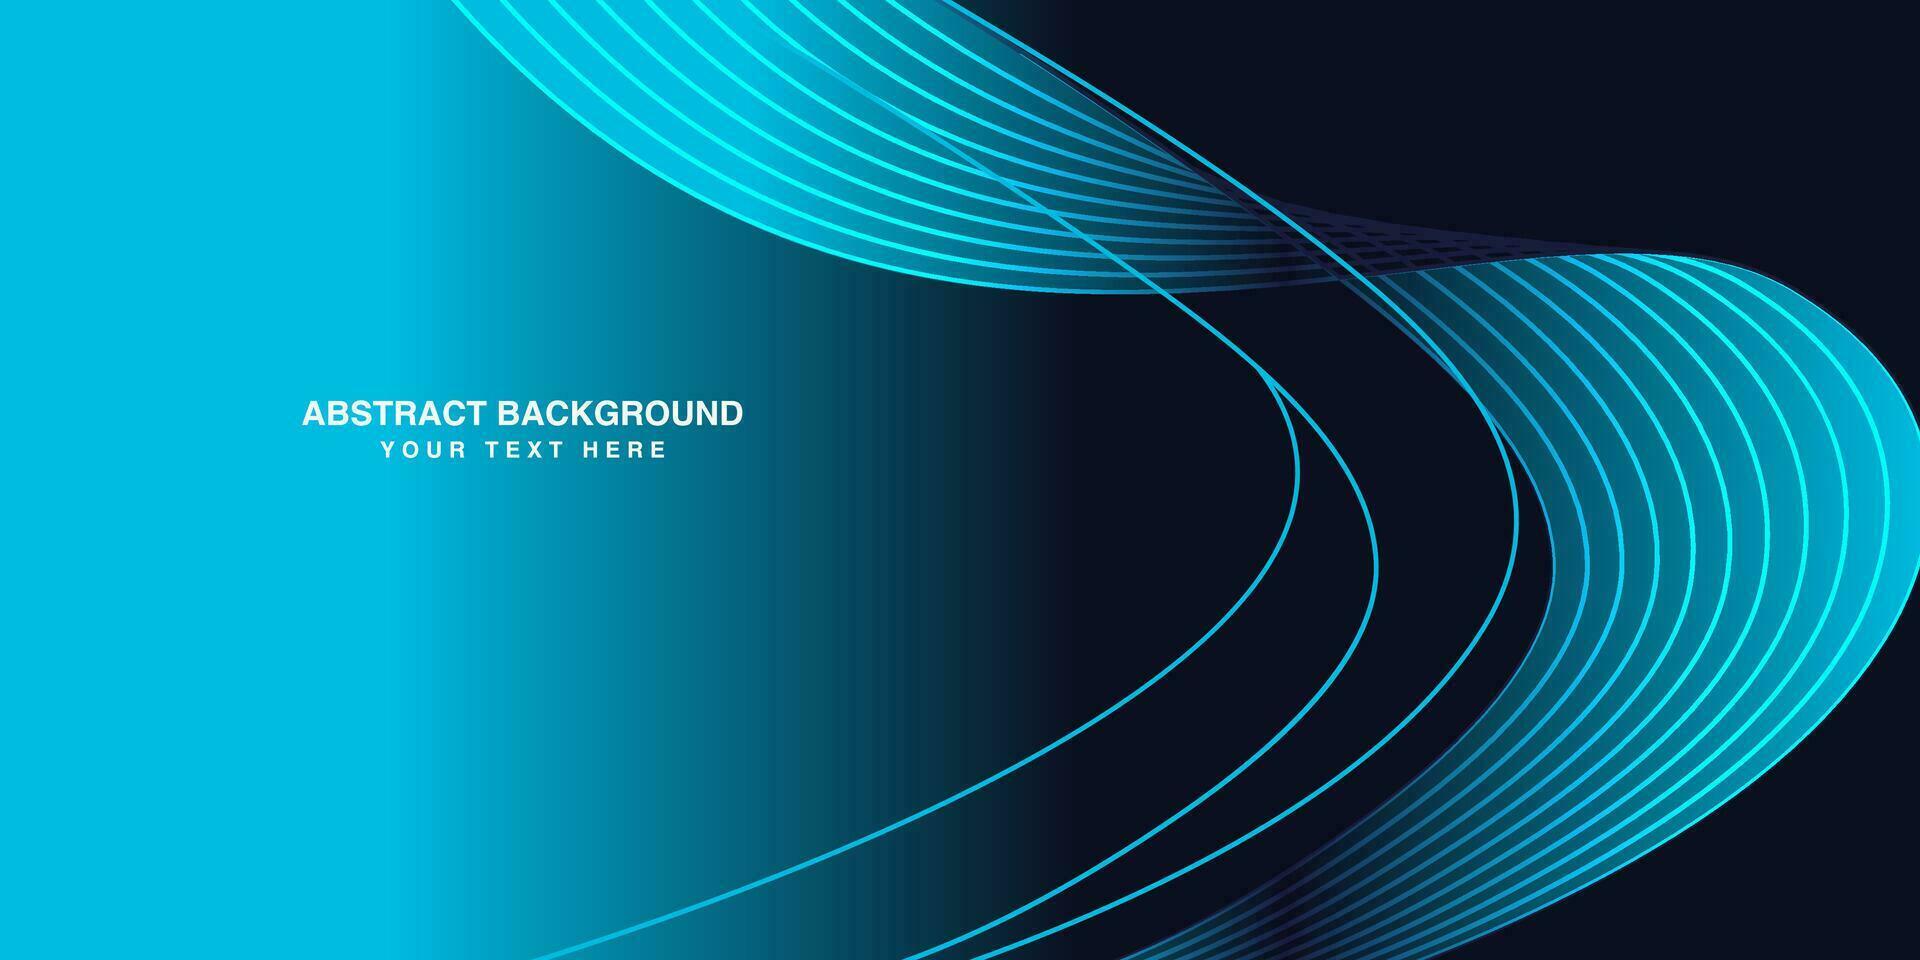 luxurious Abstract Background design illustration, Blue Background creative vector